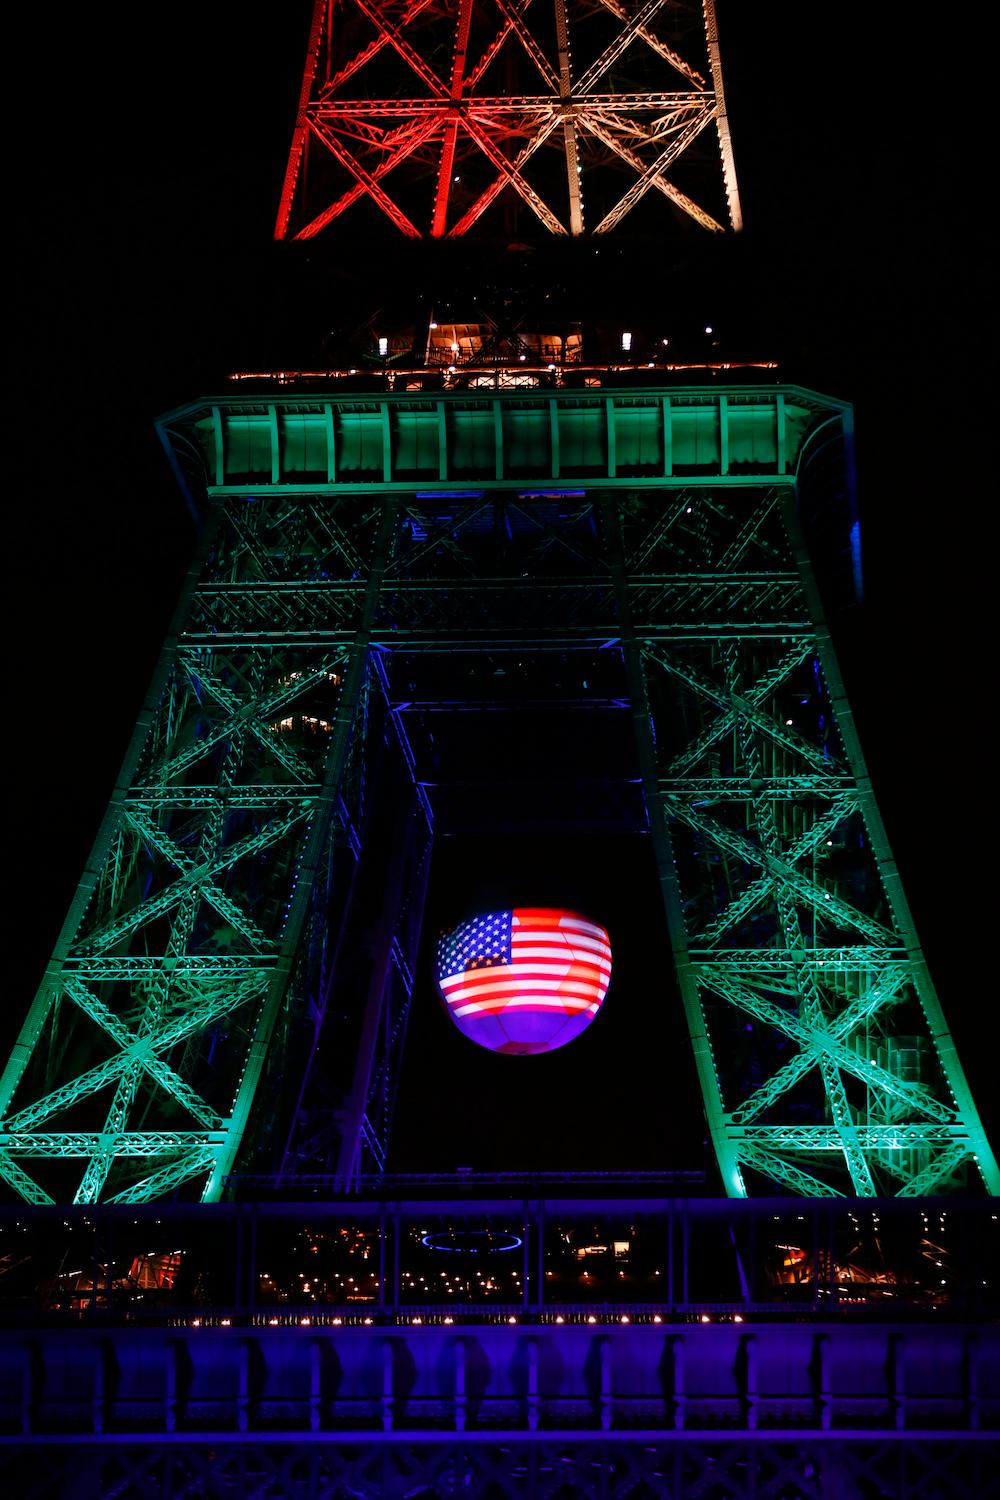 The American flag is projected onto the Eiffel Tower illuminated in memory of the victims of the nightclub mass shooting in Orlando on June 13.